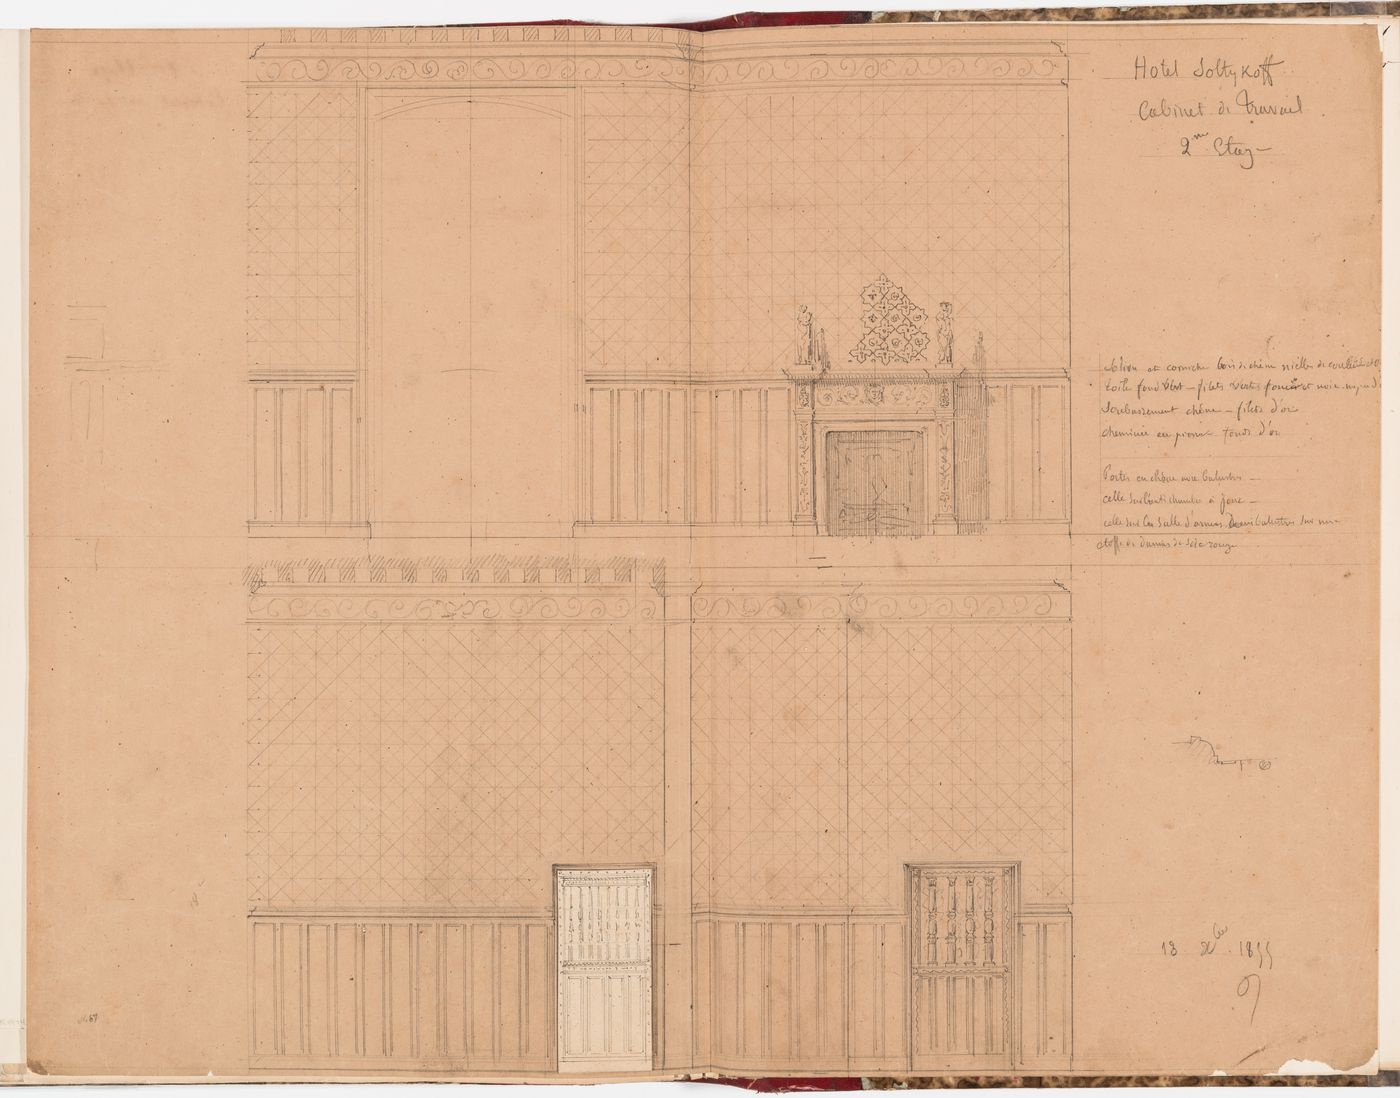 Interior elevation for the "cabinet de travail" or the "cabinet sur la cour" on the second floor, including a design and a variant design for a wooden screen, Hôtel Soltykoff